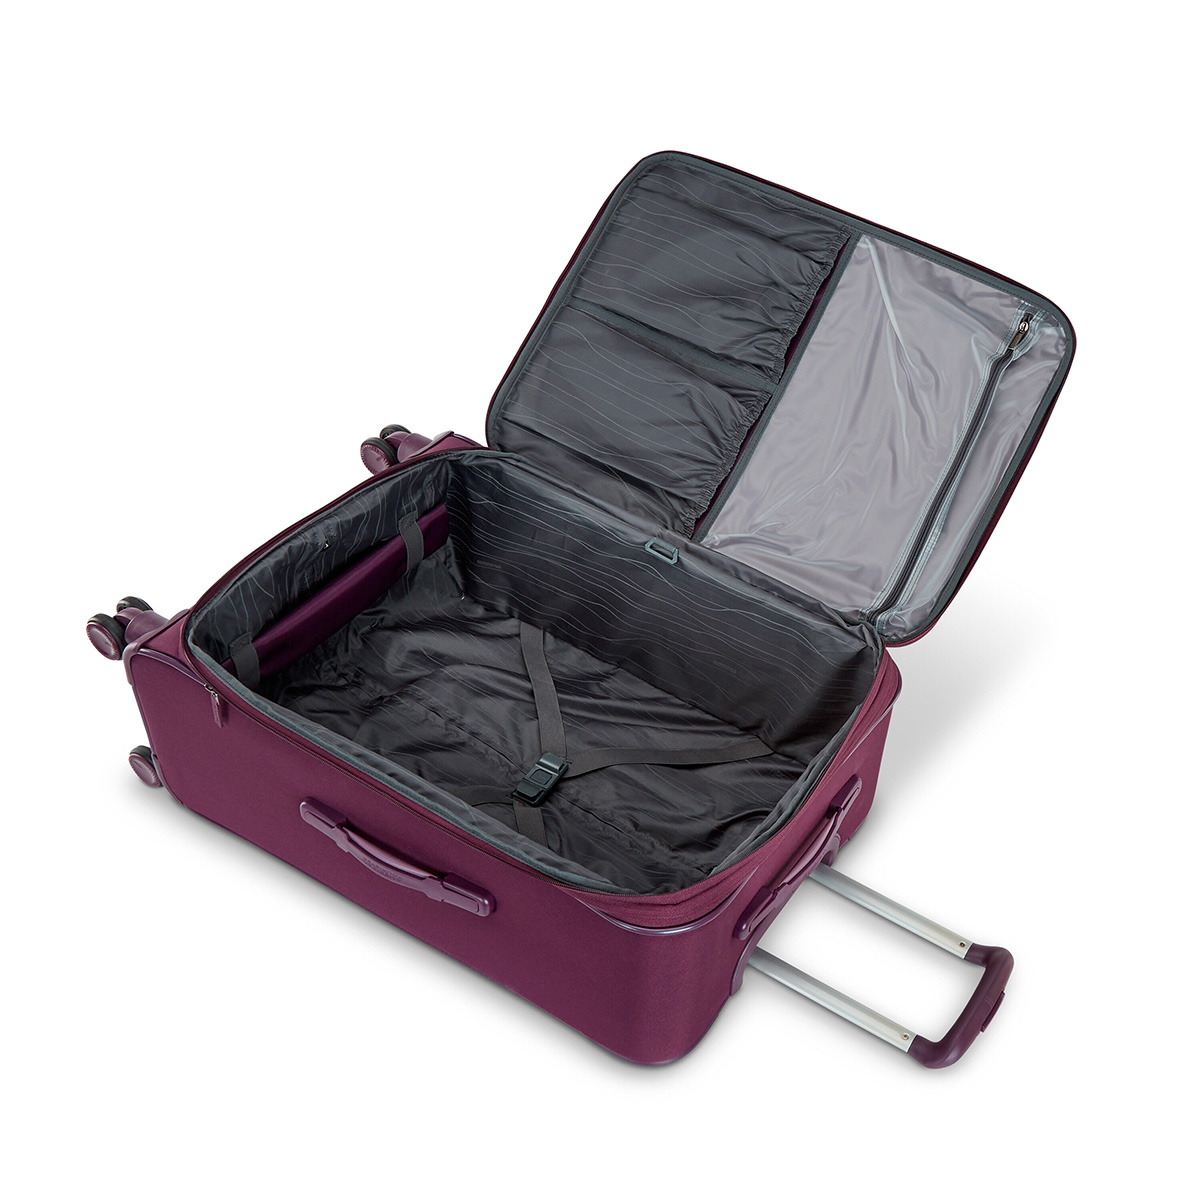 American Tourister(R) Cascade 24in. Spinner Luggage